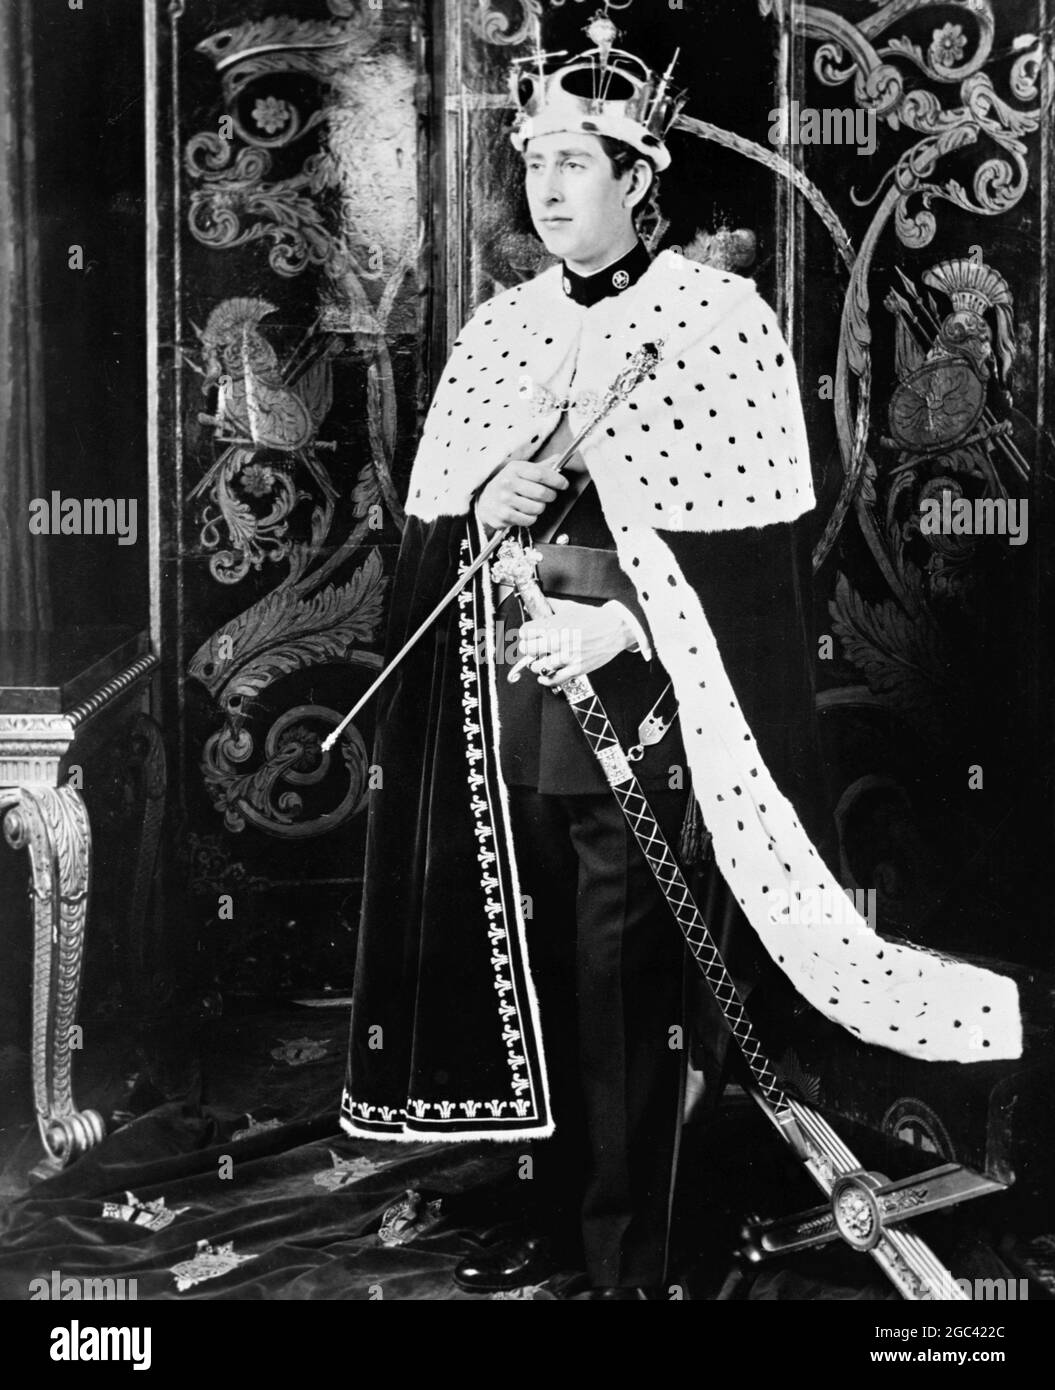 The official picture of Prince Charles, who will become the Prince of Wales, at a ceremony to be performed by Her Majesty Queen Elizabeth II at Caernarvon Castle, Wales on 1 July 1969. The Prince of Wales, pictured by Norman Parkinson at Windsor Castle, Berkshire is wearing his full regalia. Over a military uniform he wears an ermine robe. On his head is the Gold Coronet, weighing 3lbs and containing 75 diamonds and 12 emeralds. In one hand he carries the Gold Rod; in the other, the Sword of Office. 25 June 1969 Stock Photo